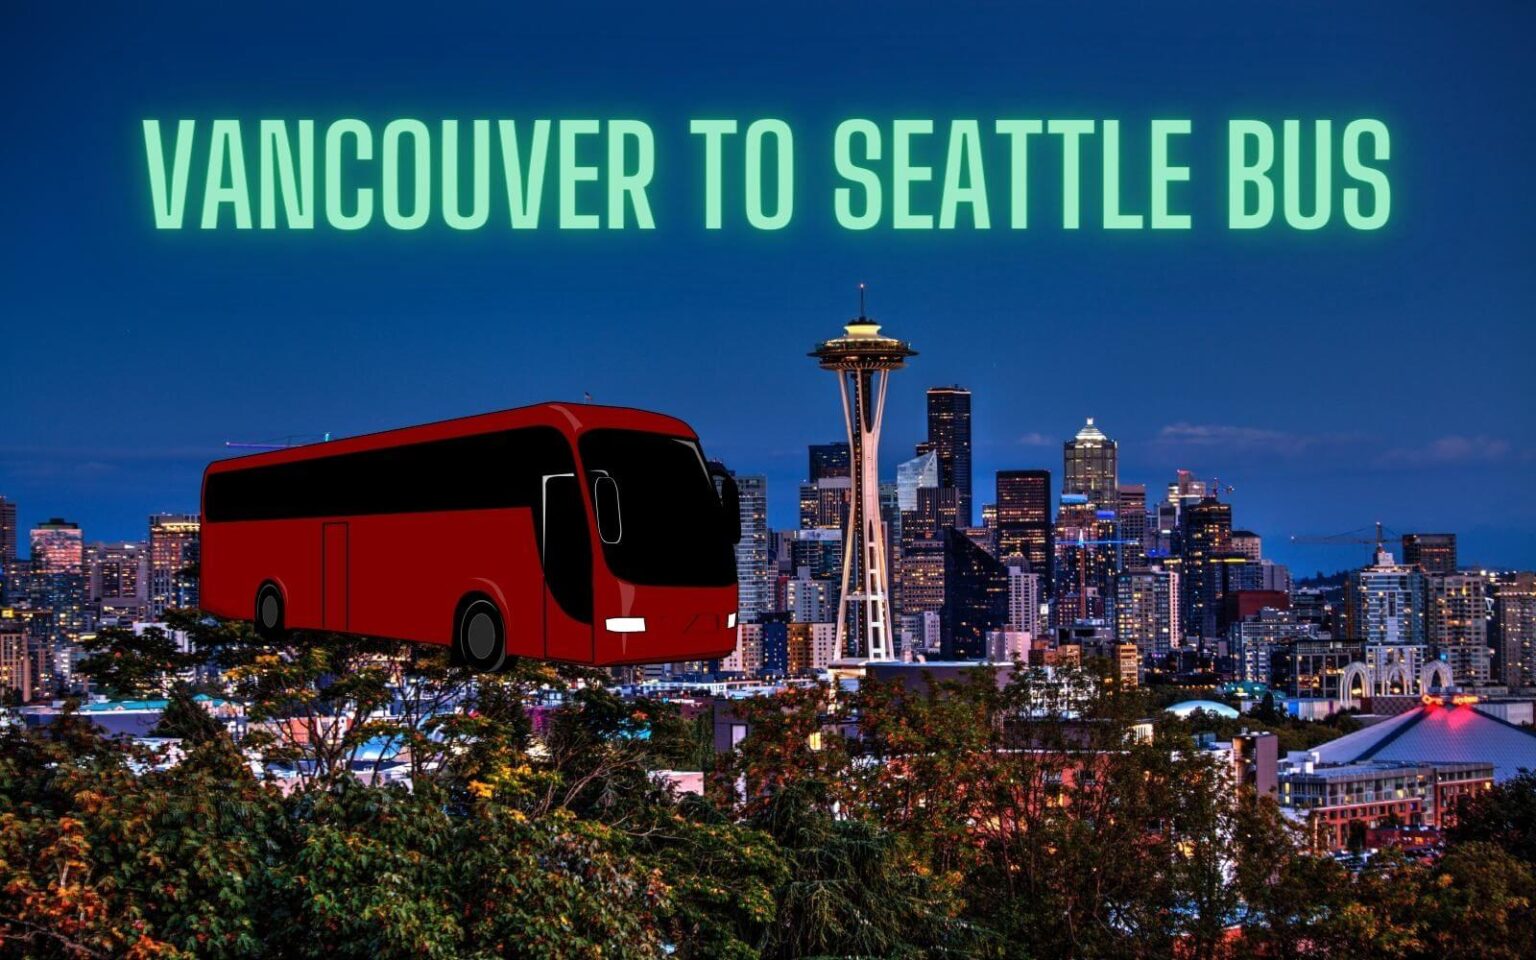 Vancouver To Seattle Bus 1536x960 